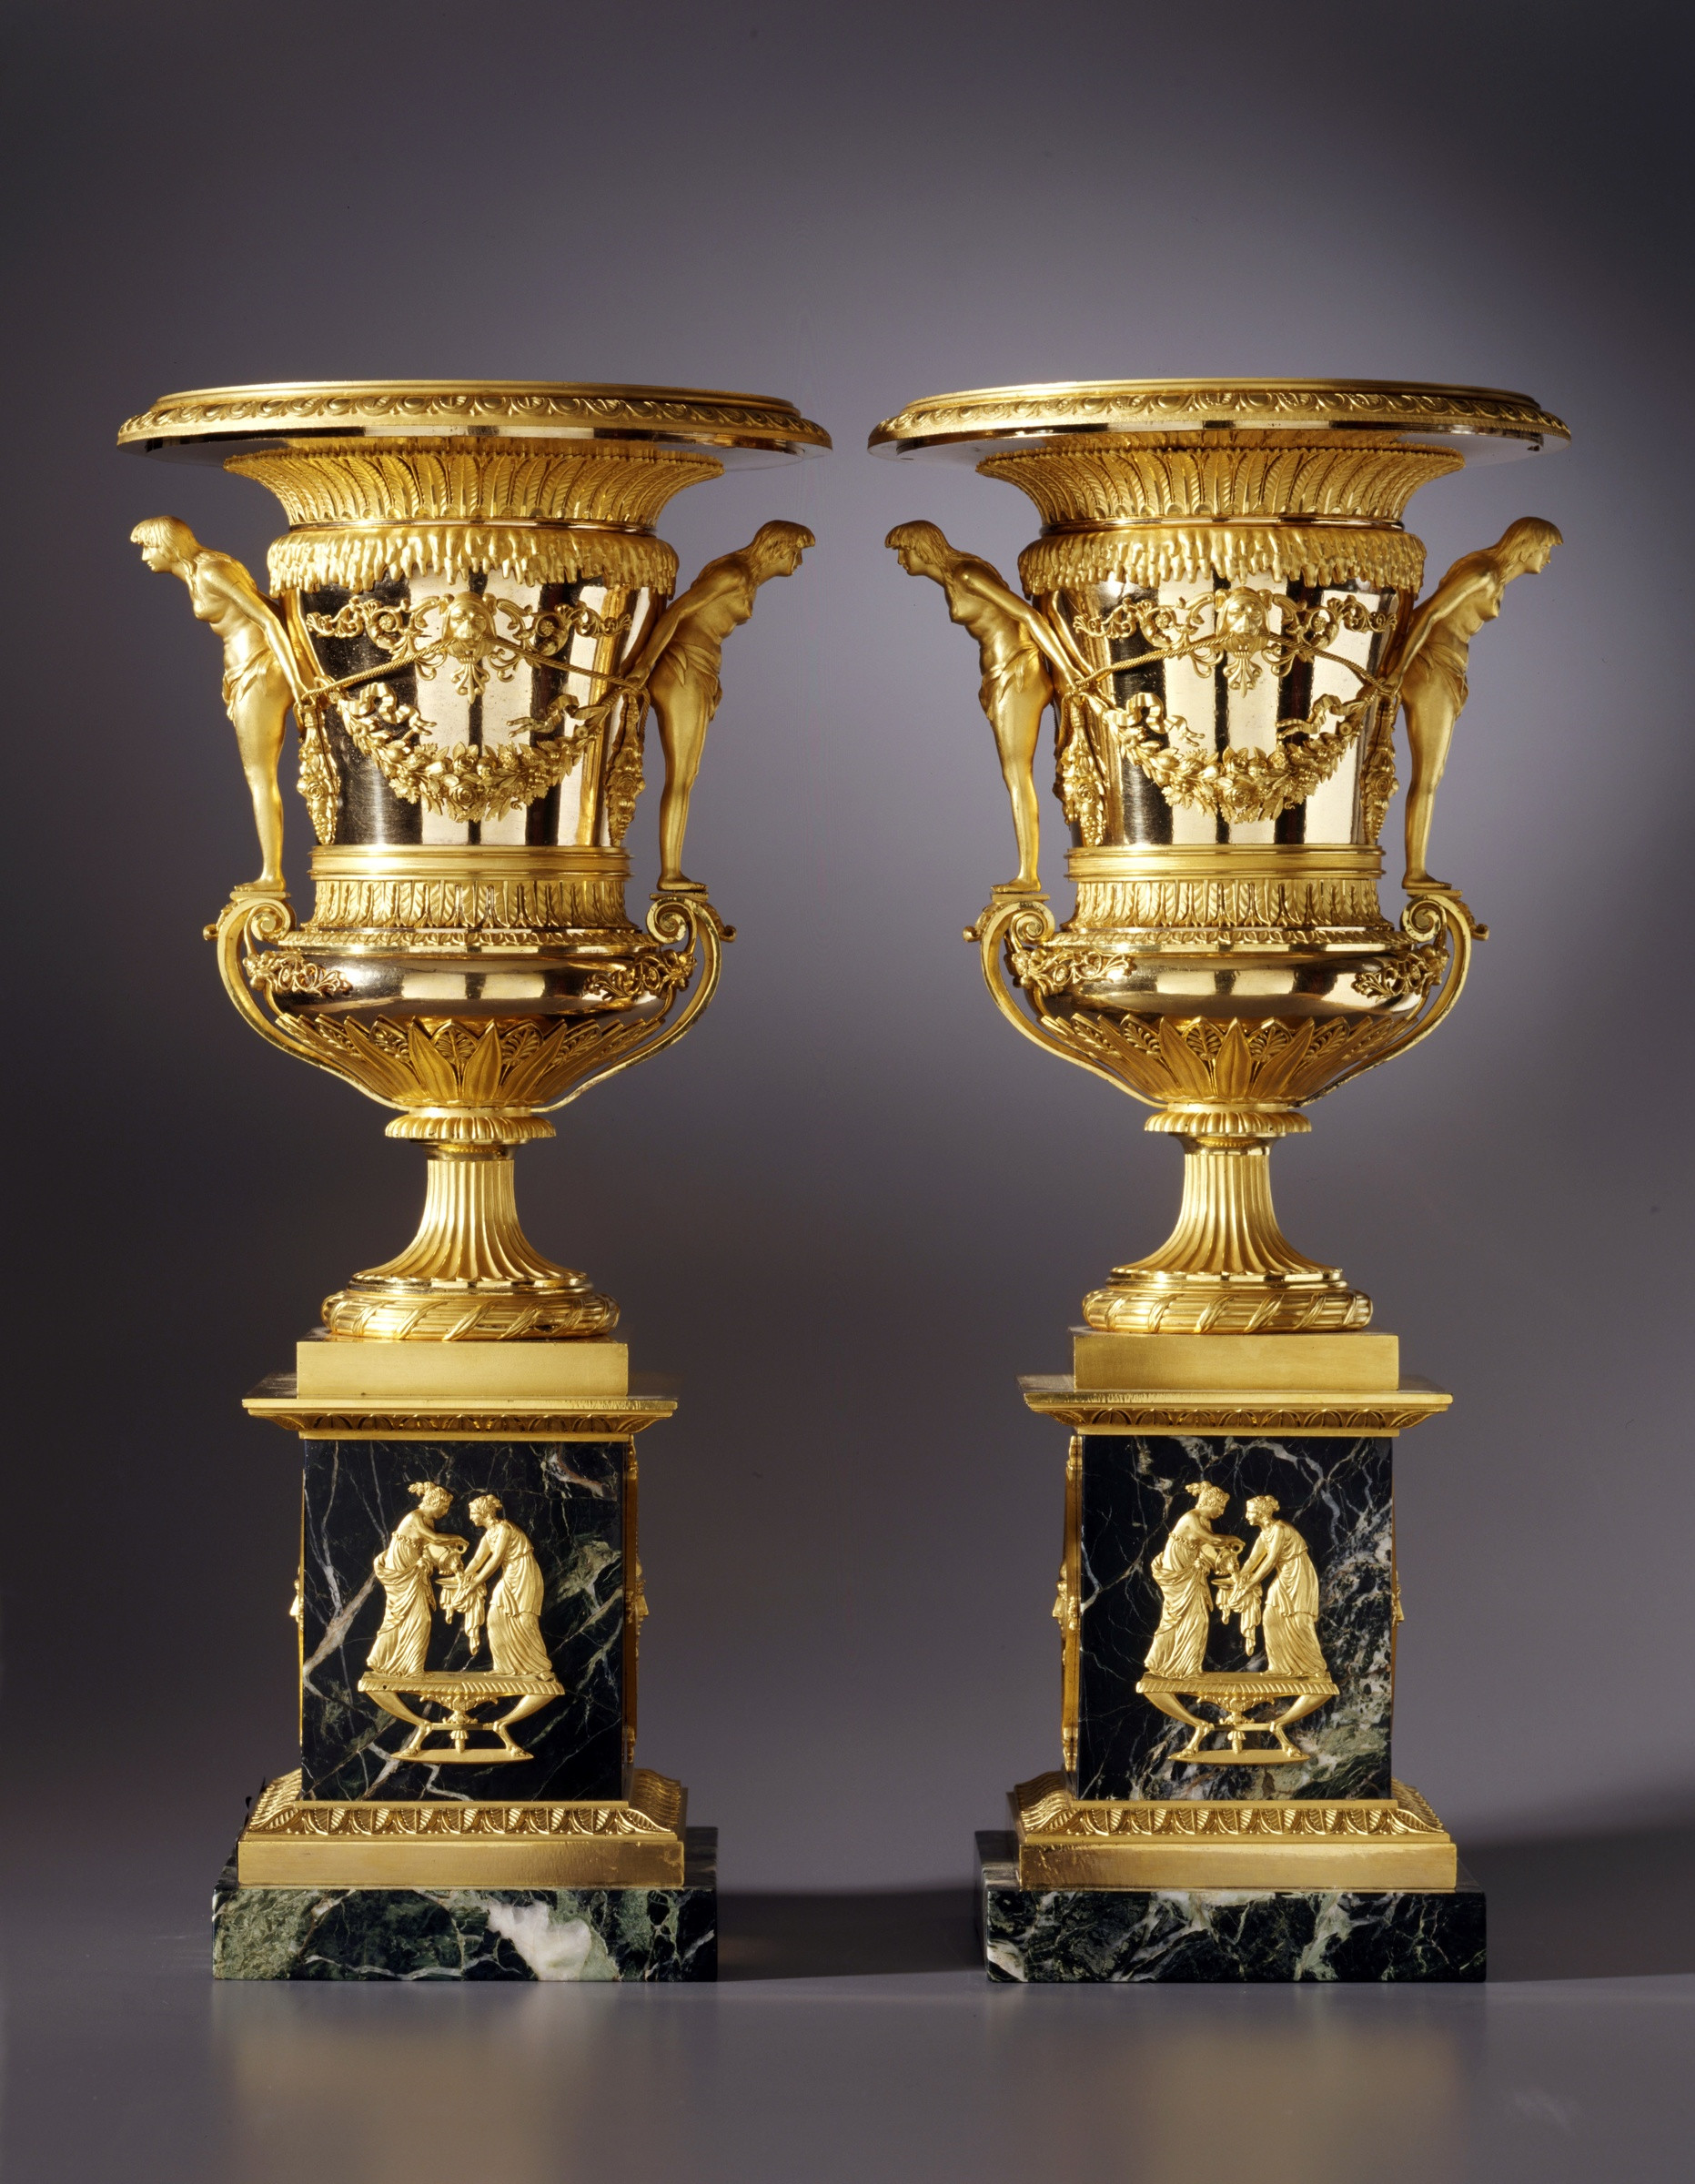 Large Urn Vase Of Friedrich Bergenfeldt attributed to A Pair Of Large Sized St with Regard to A Pair Of Large Sized St Petersburg Empire Vases attributed to Friedrich Bergenfeldt